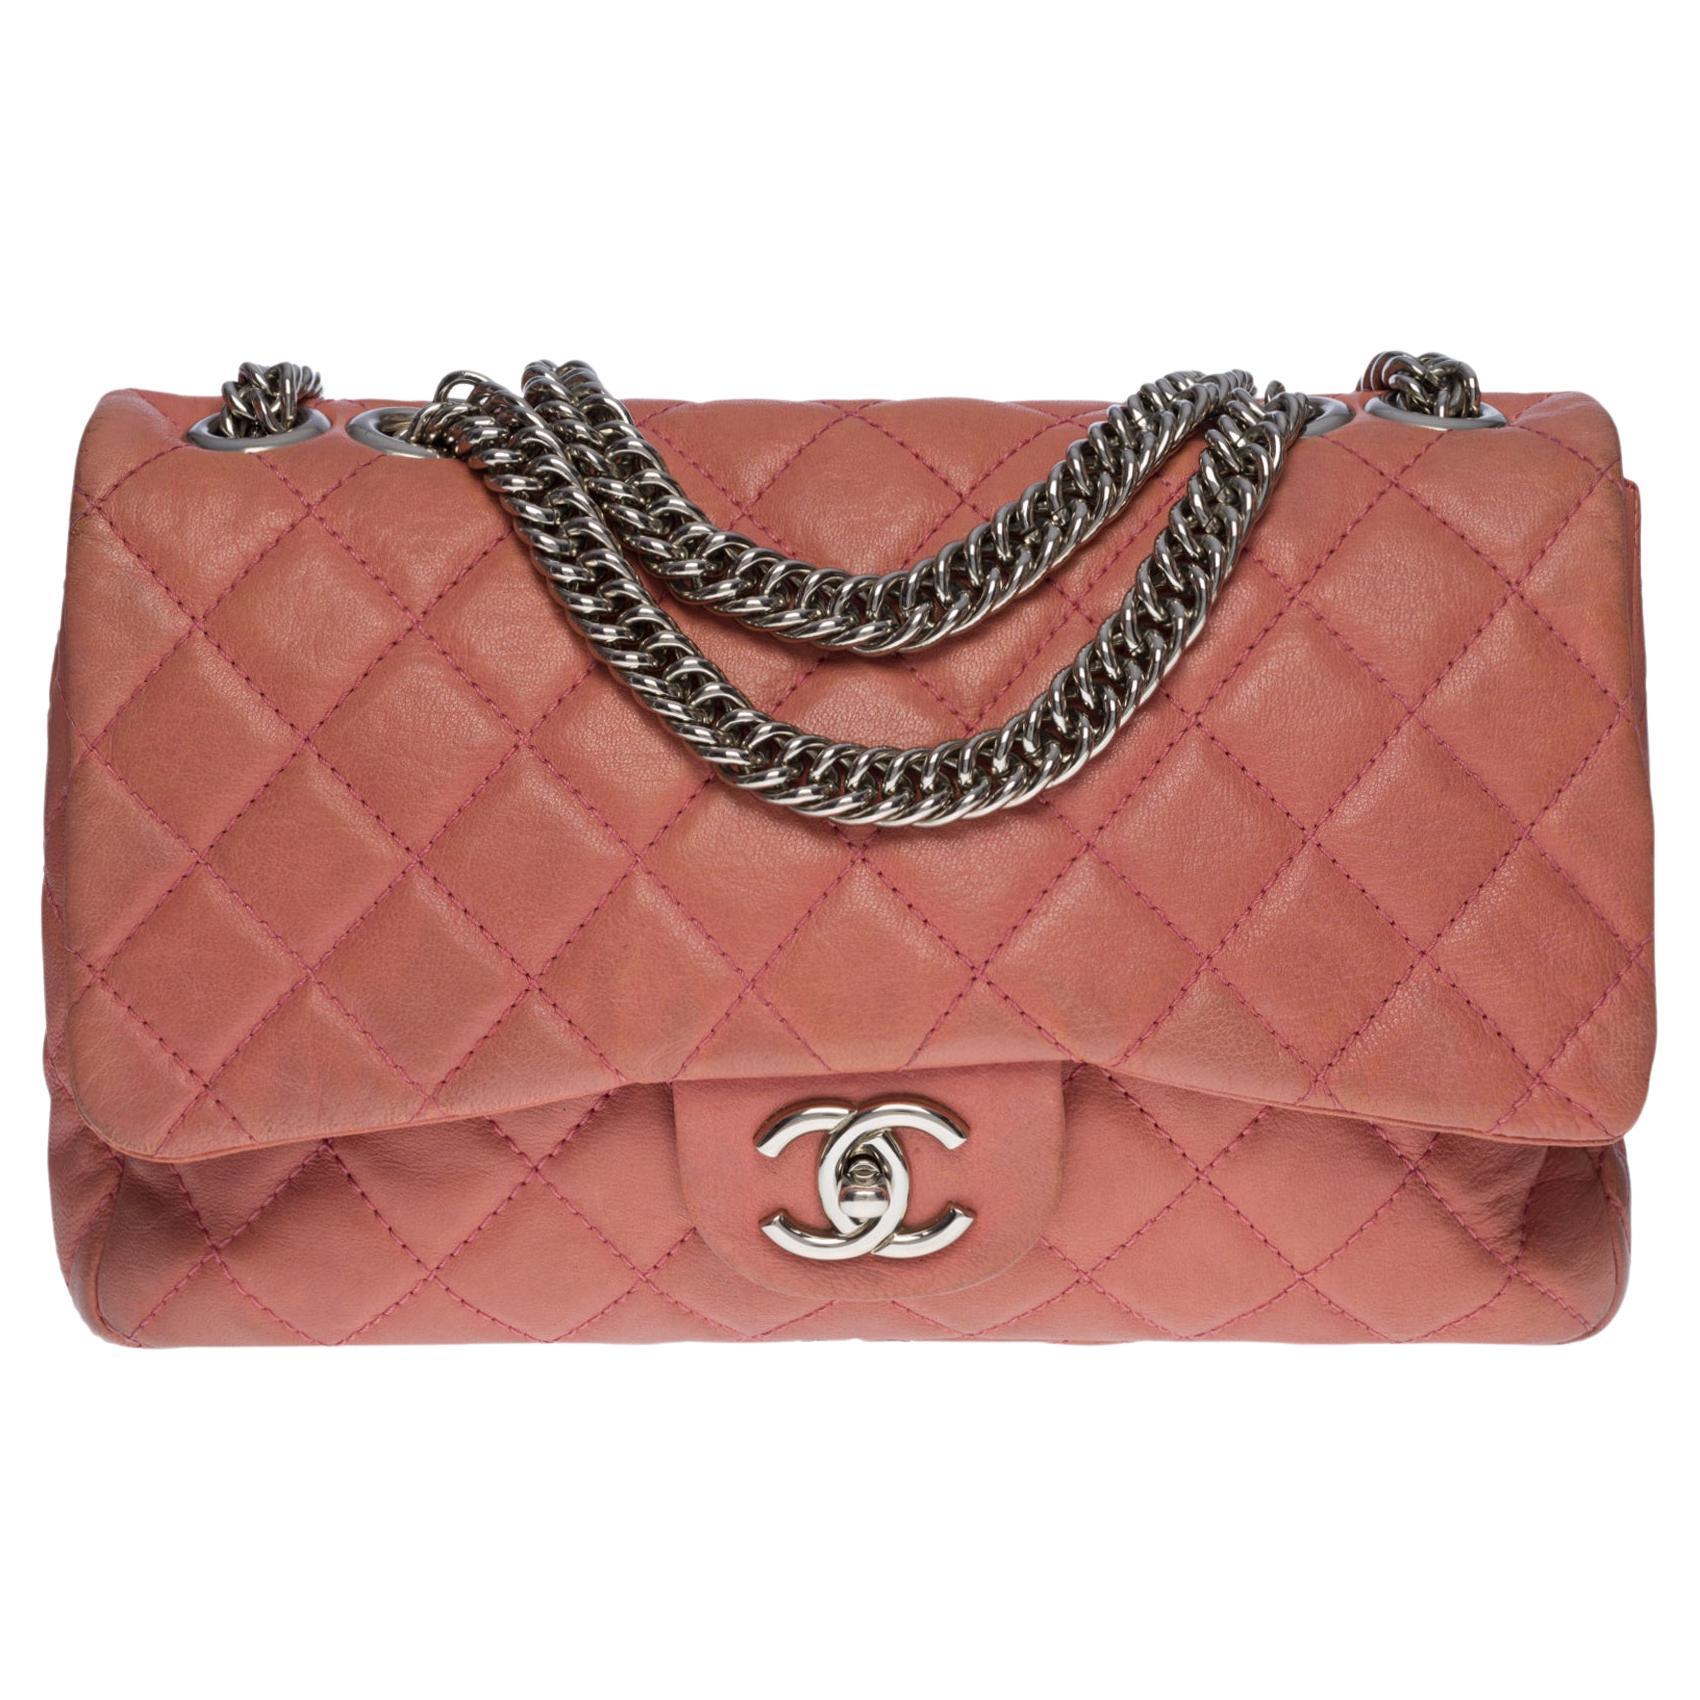  The Chanel Timeless/Classique Jumbo single flap bag handbag in powder pink aged For Sale